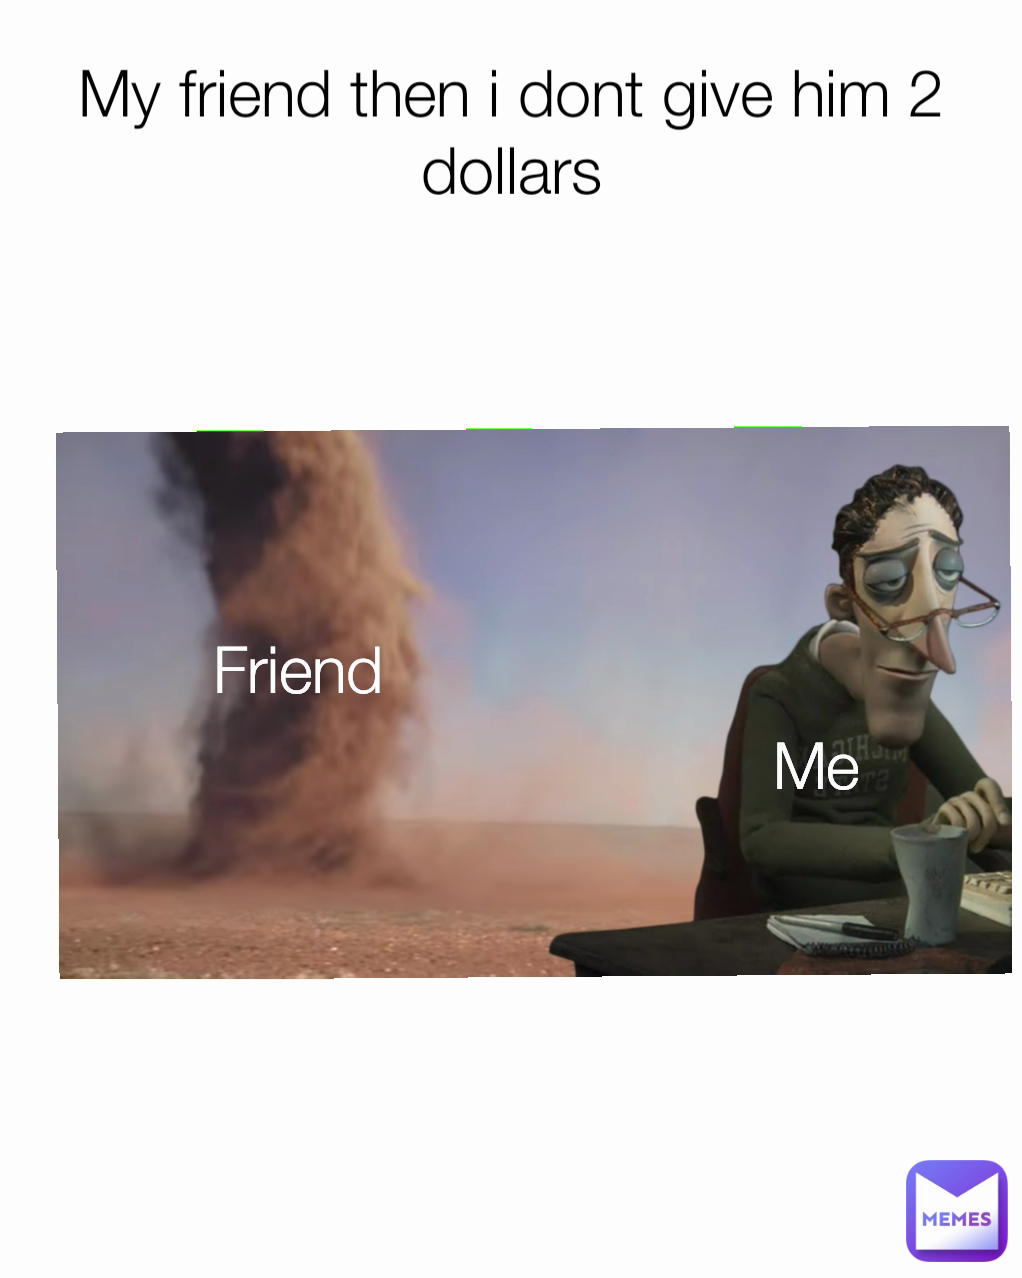 Me Friend My friend then i dont give him 2 dollars